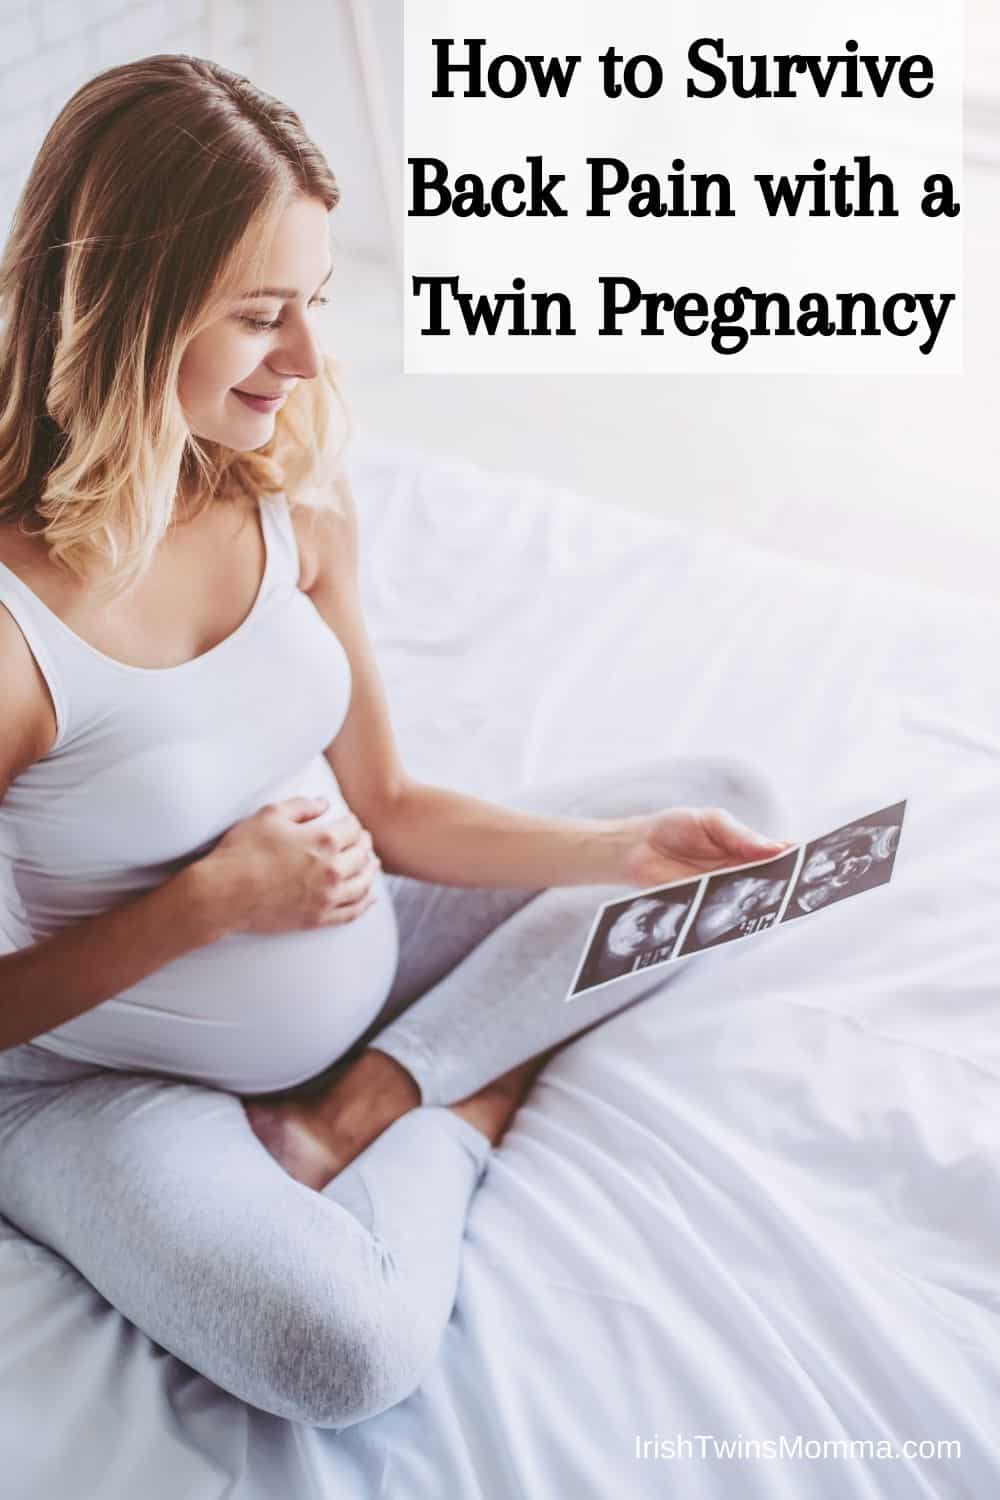 How to Survive Back Pain with a Twin Pregnancy